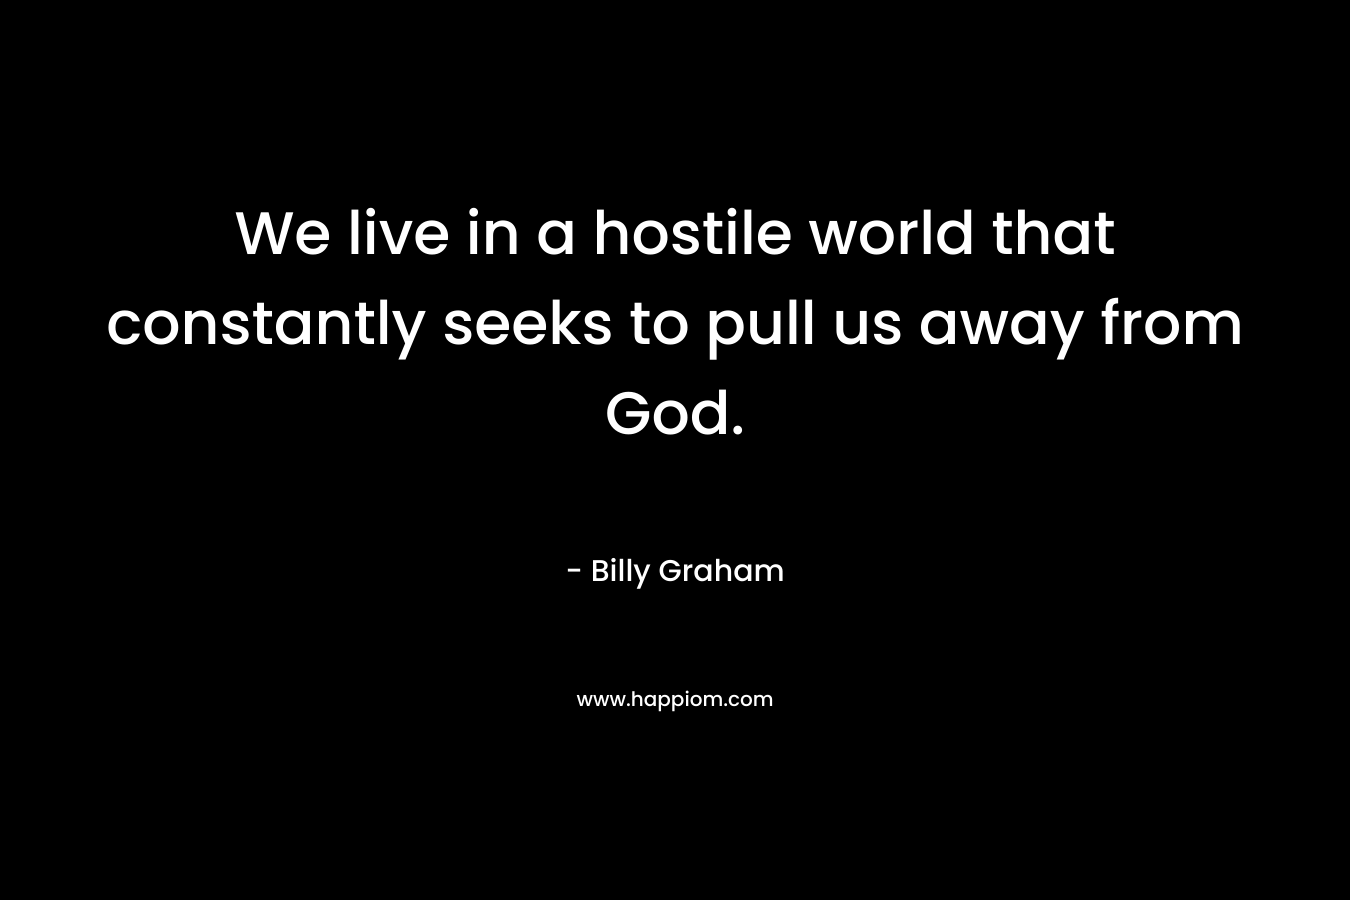 We live in a hostile world that constantly seeks to pull us away from God.